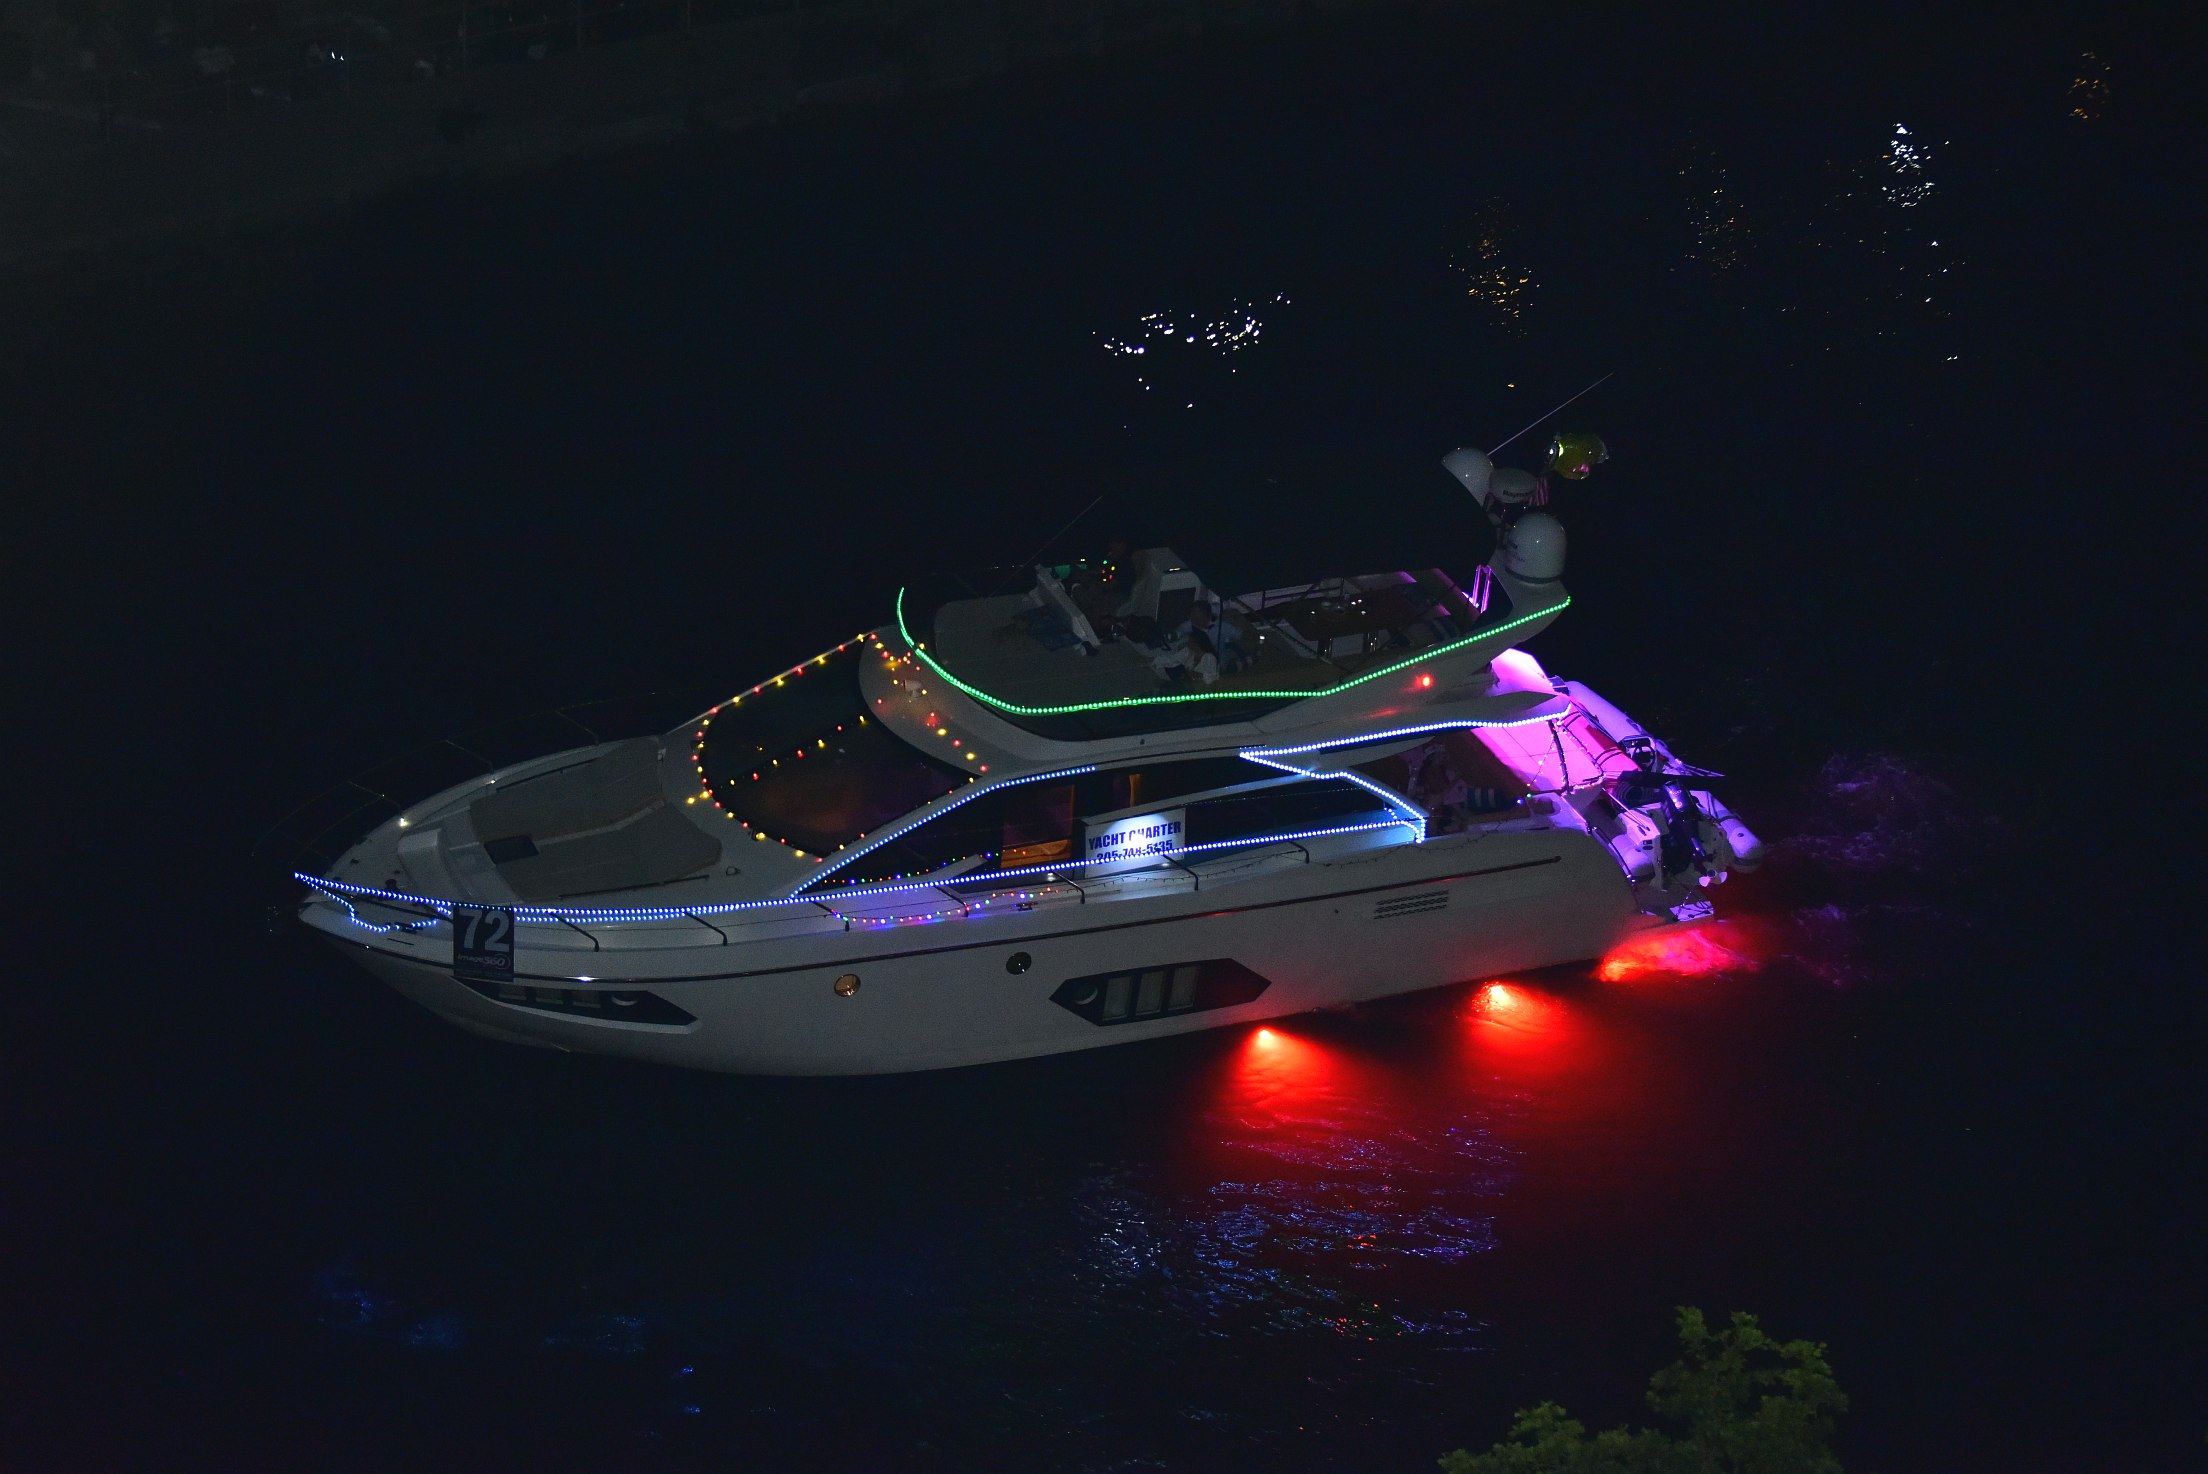 M/Y Disco, boat number 72 in the 2021 Winterfest Boat Parade